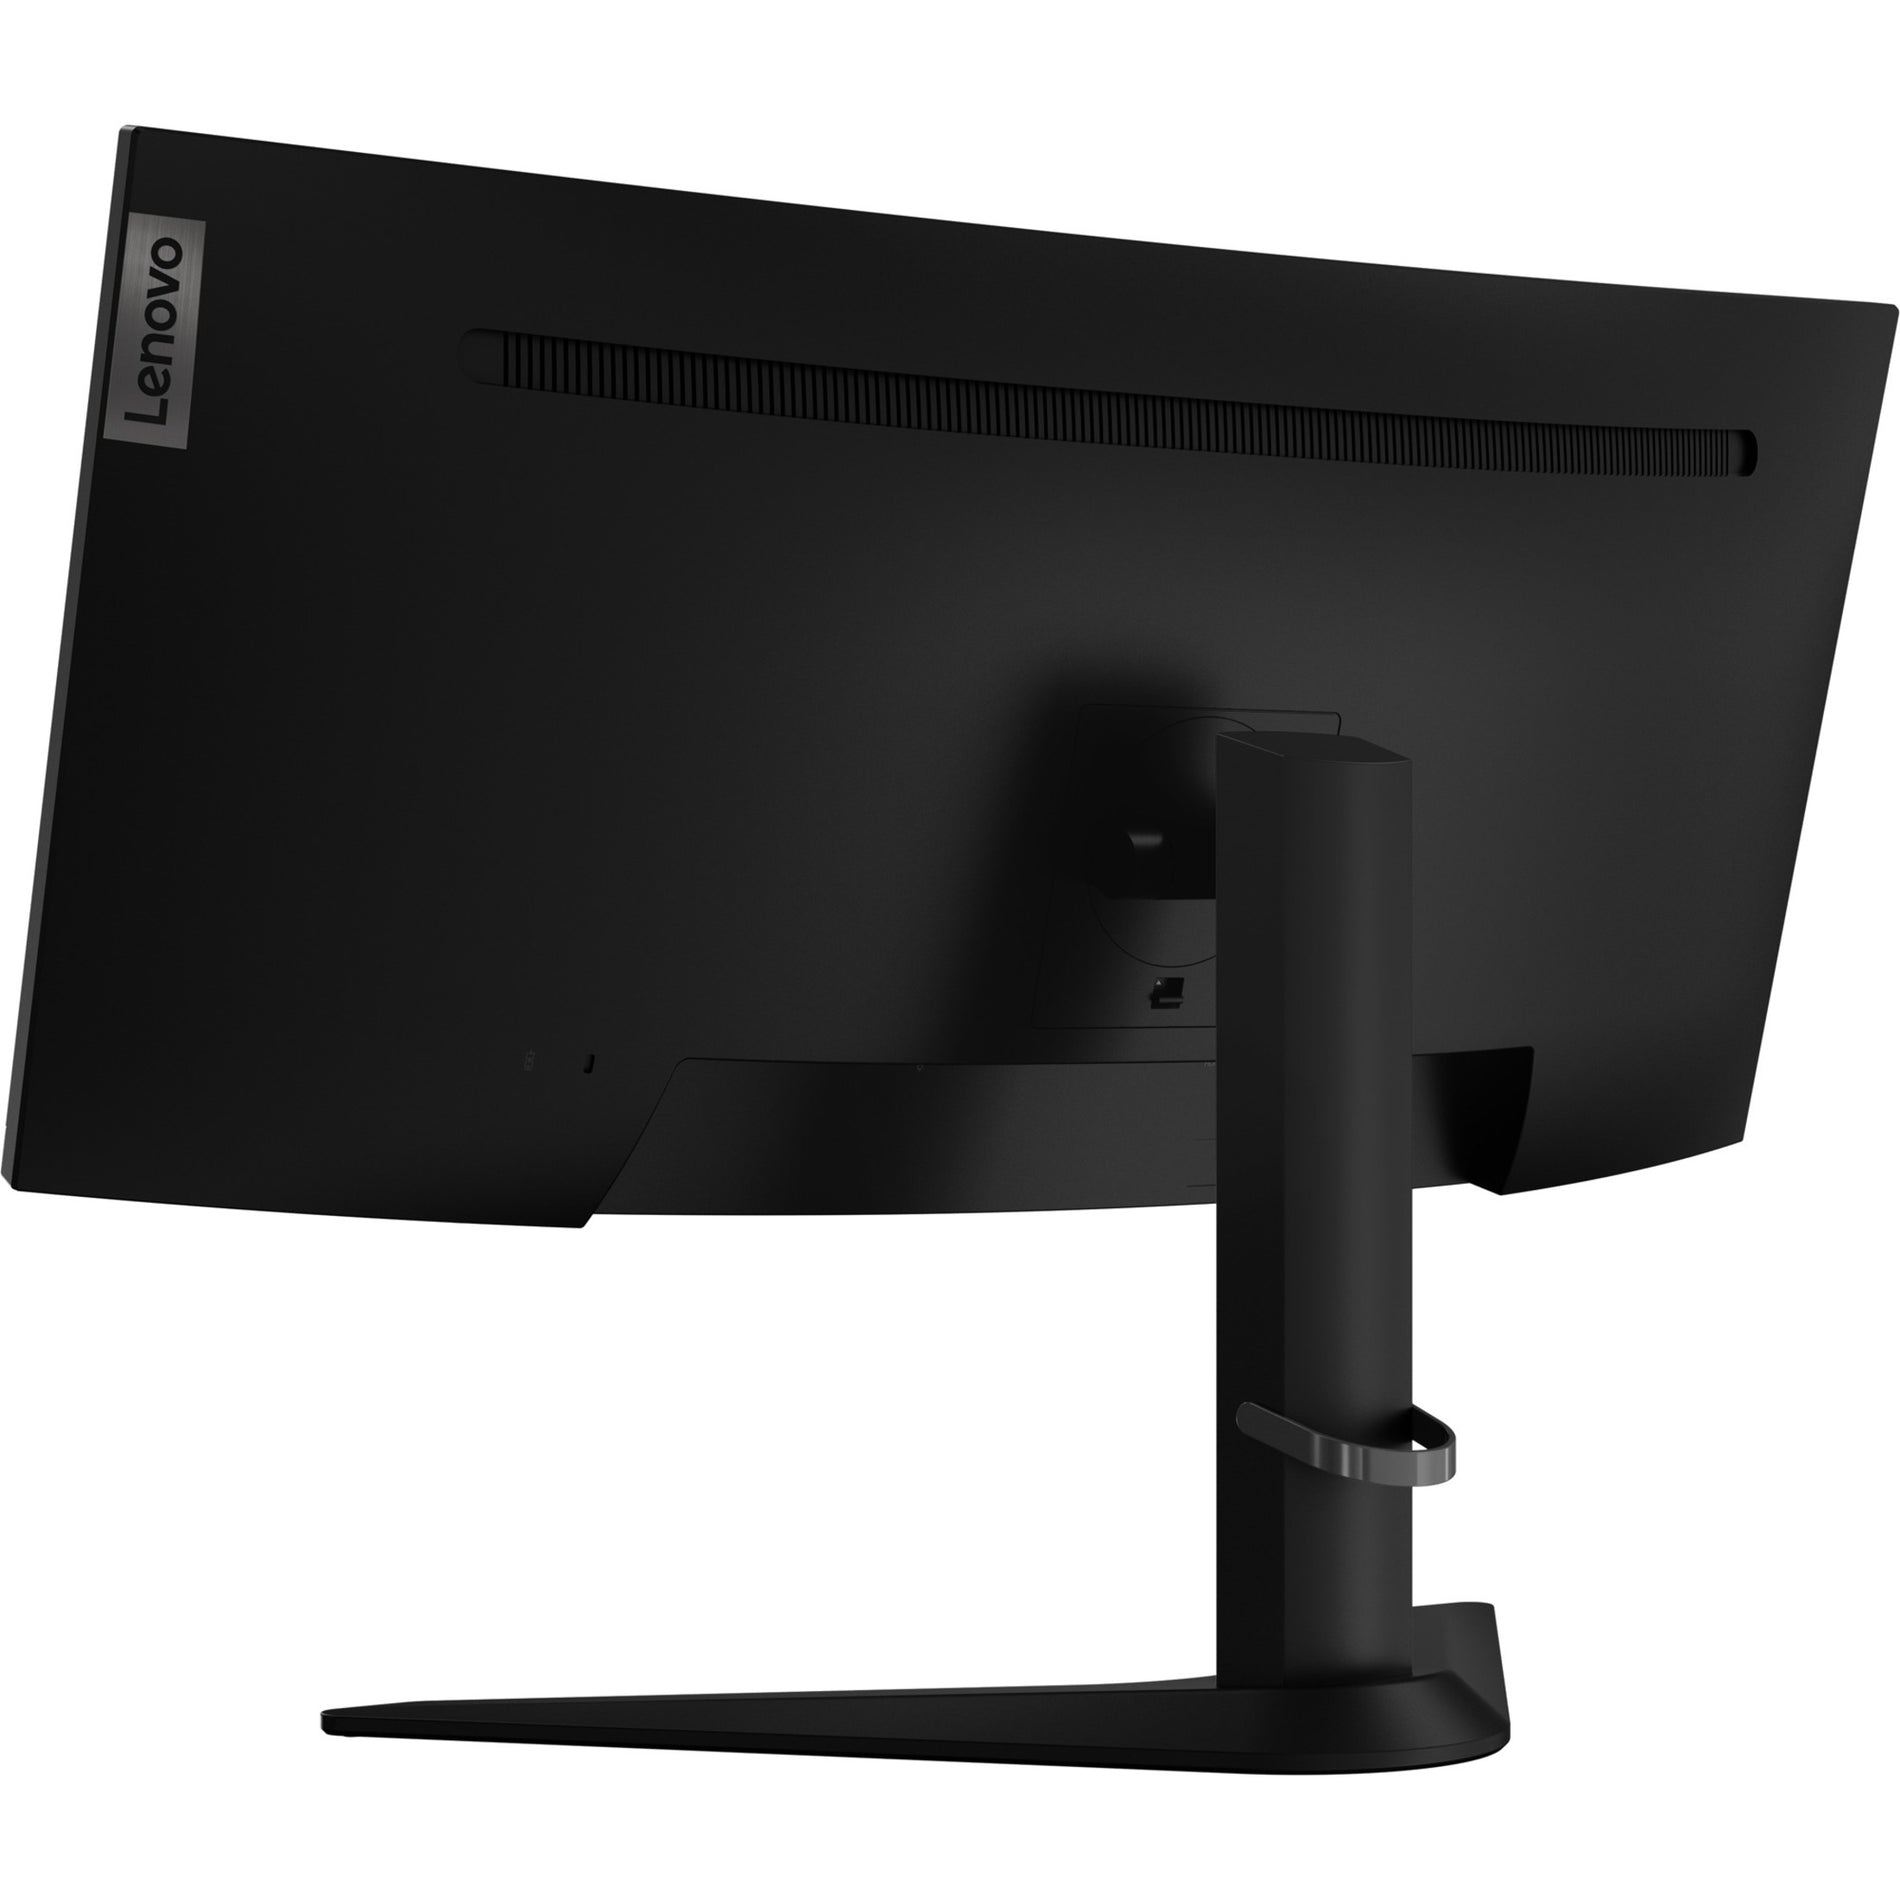 Lenovo 66A1GCCBUS G34w-10 34 Inch WLED Ultra-Wide Curved Gaming Monitor, QHD 144Hz 4ms 72% NTSC